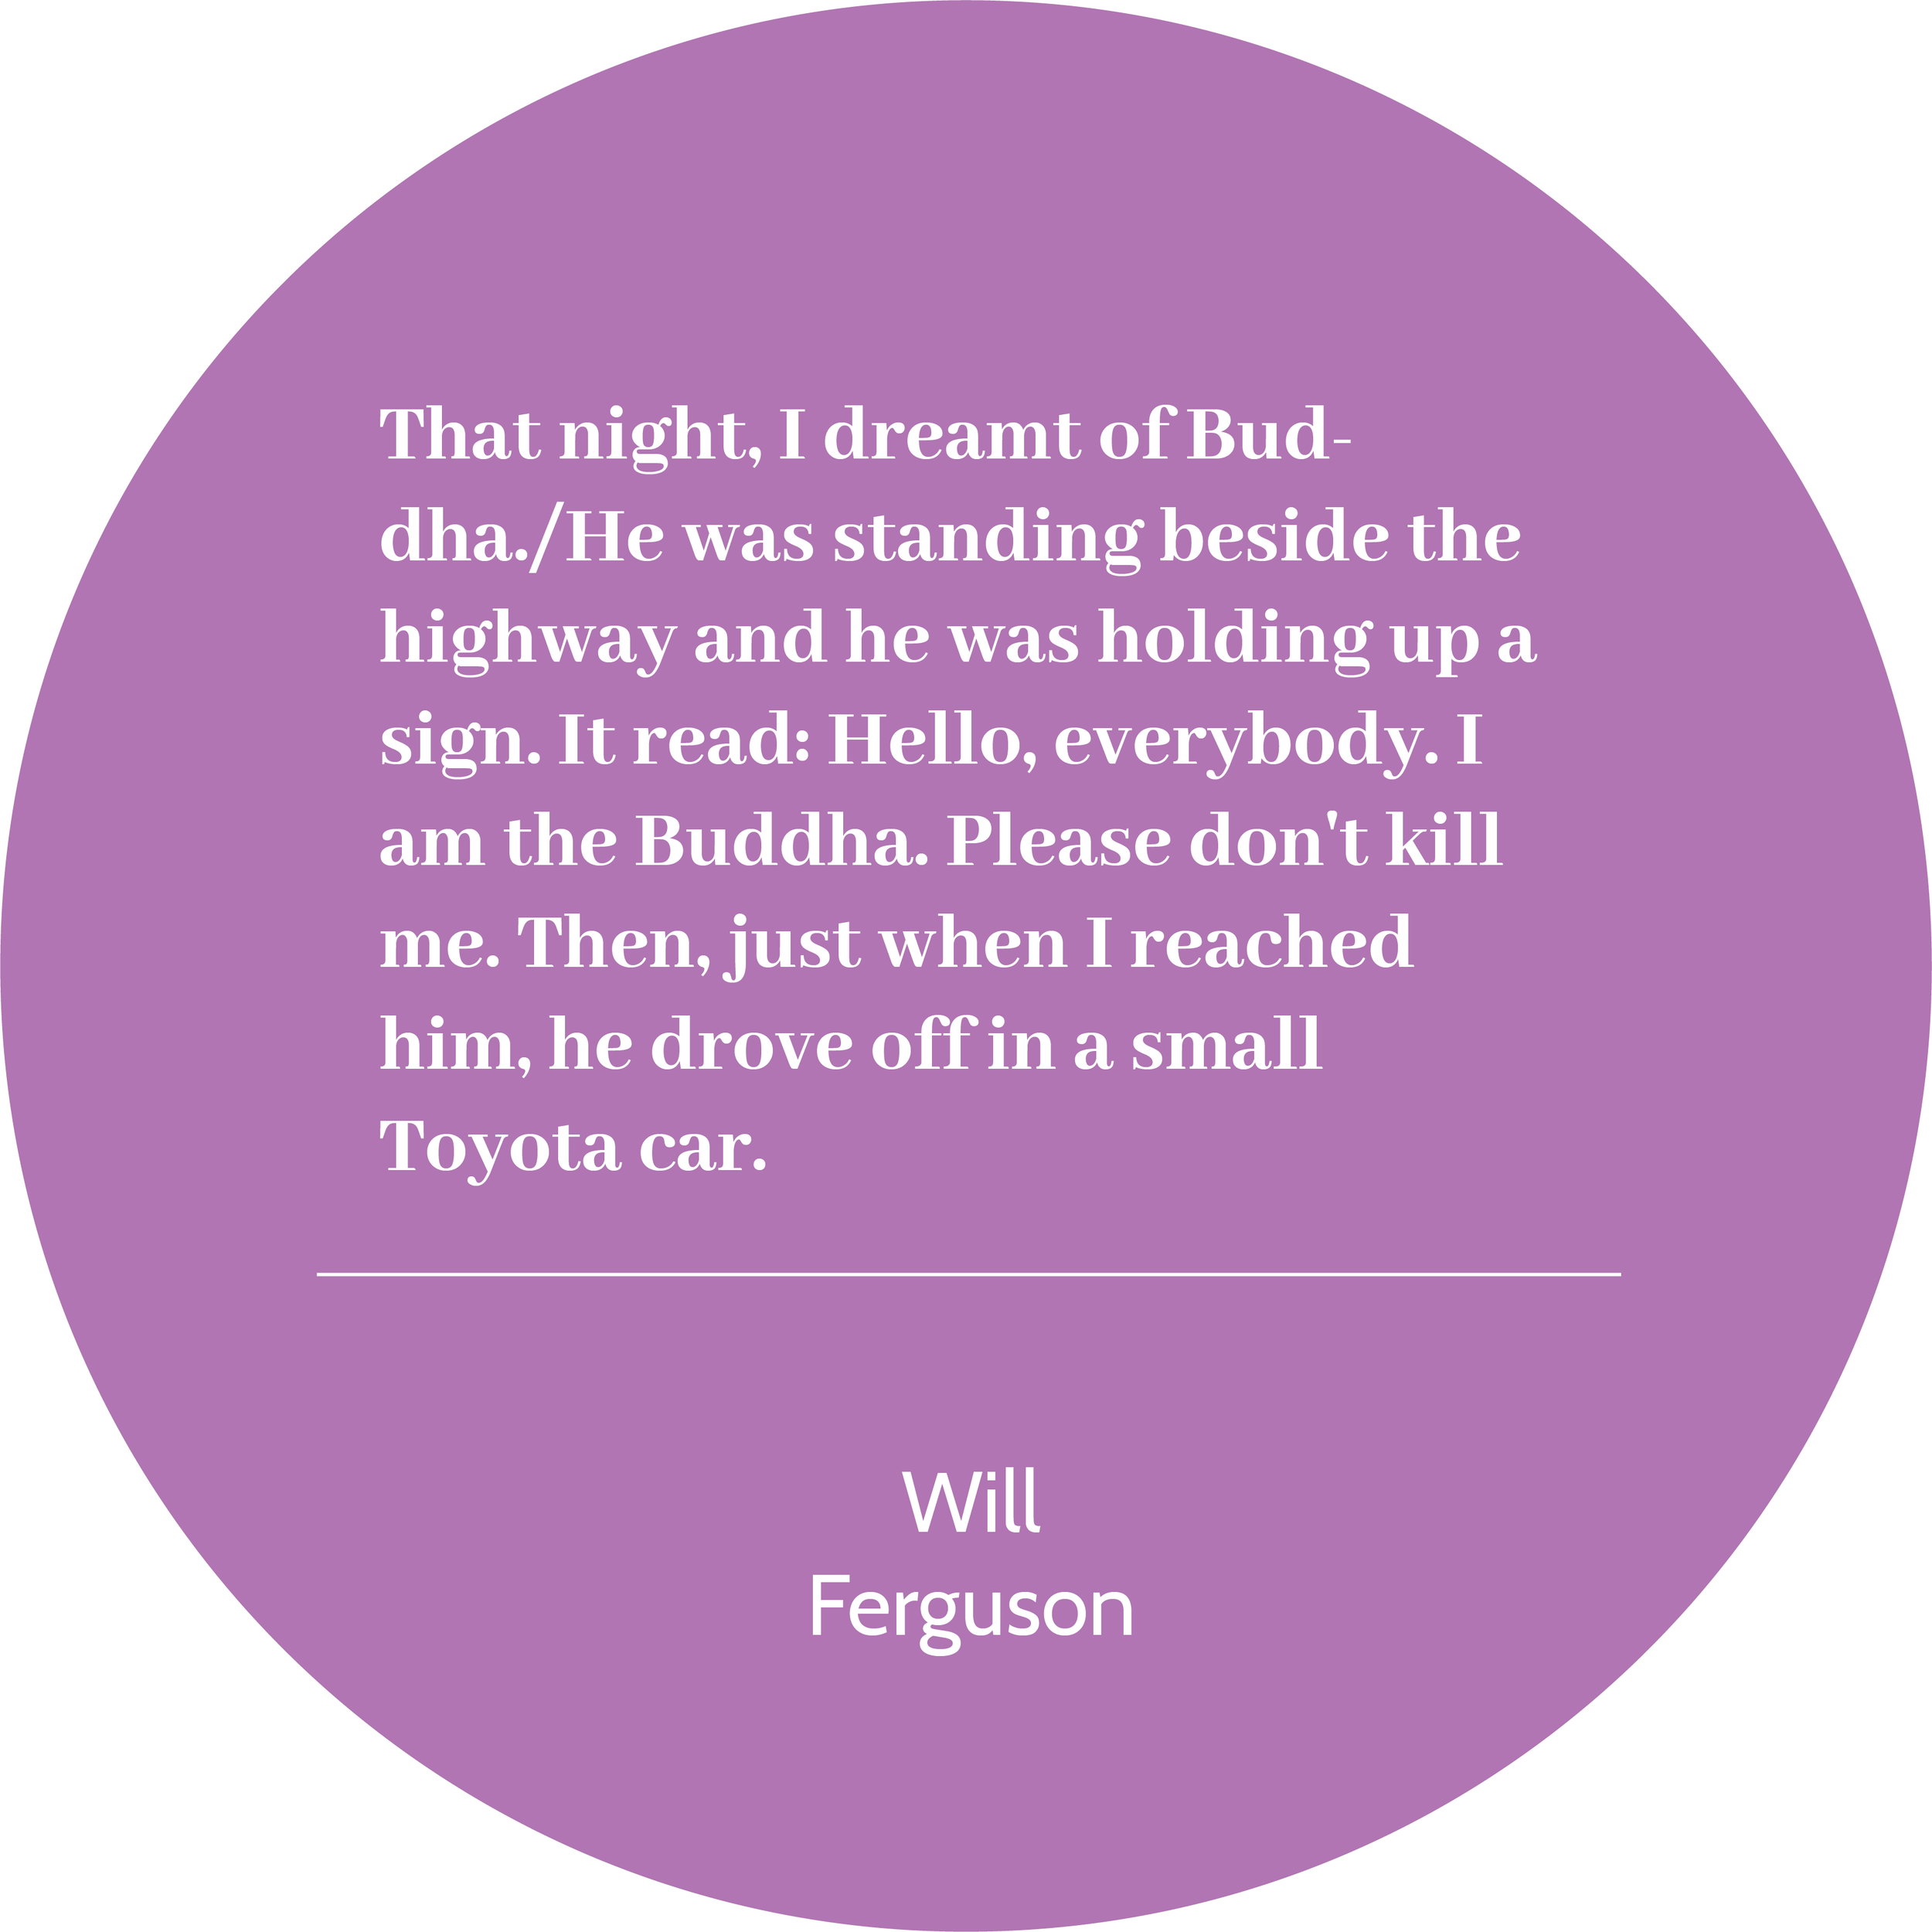 Will Ferguson quote 4 2019.04.24.png